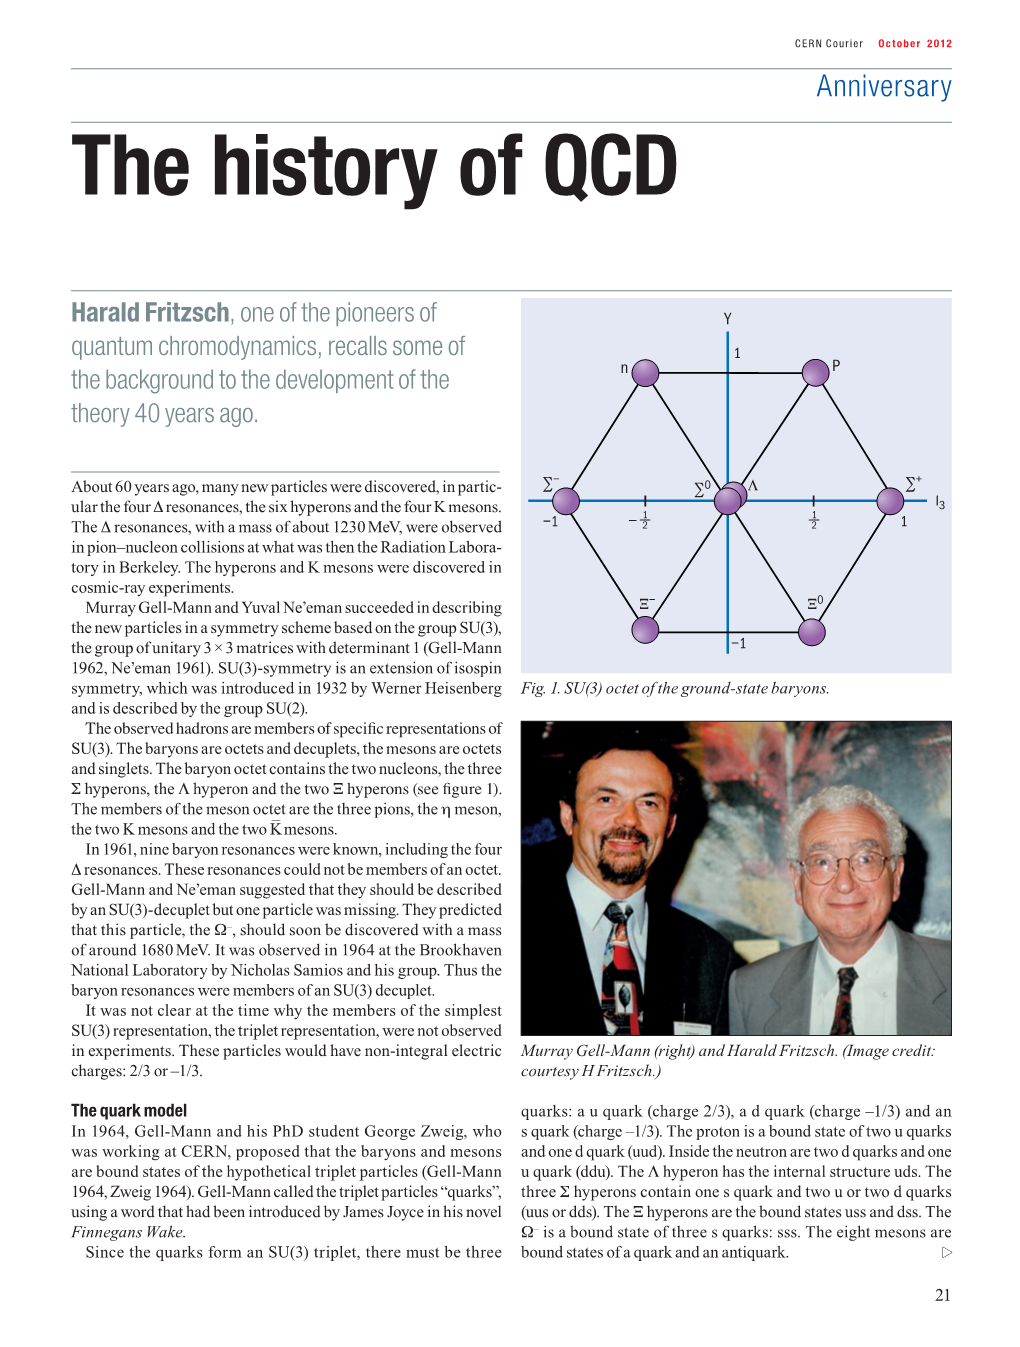 The History of QCD